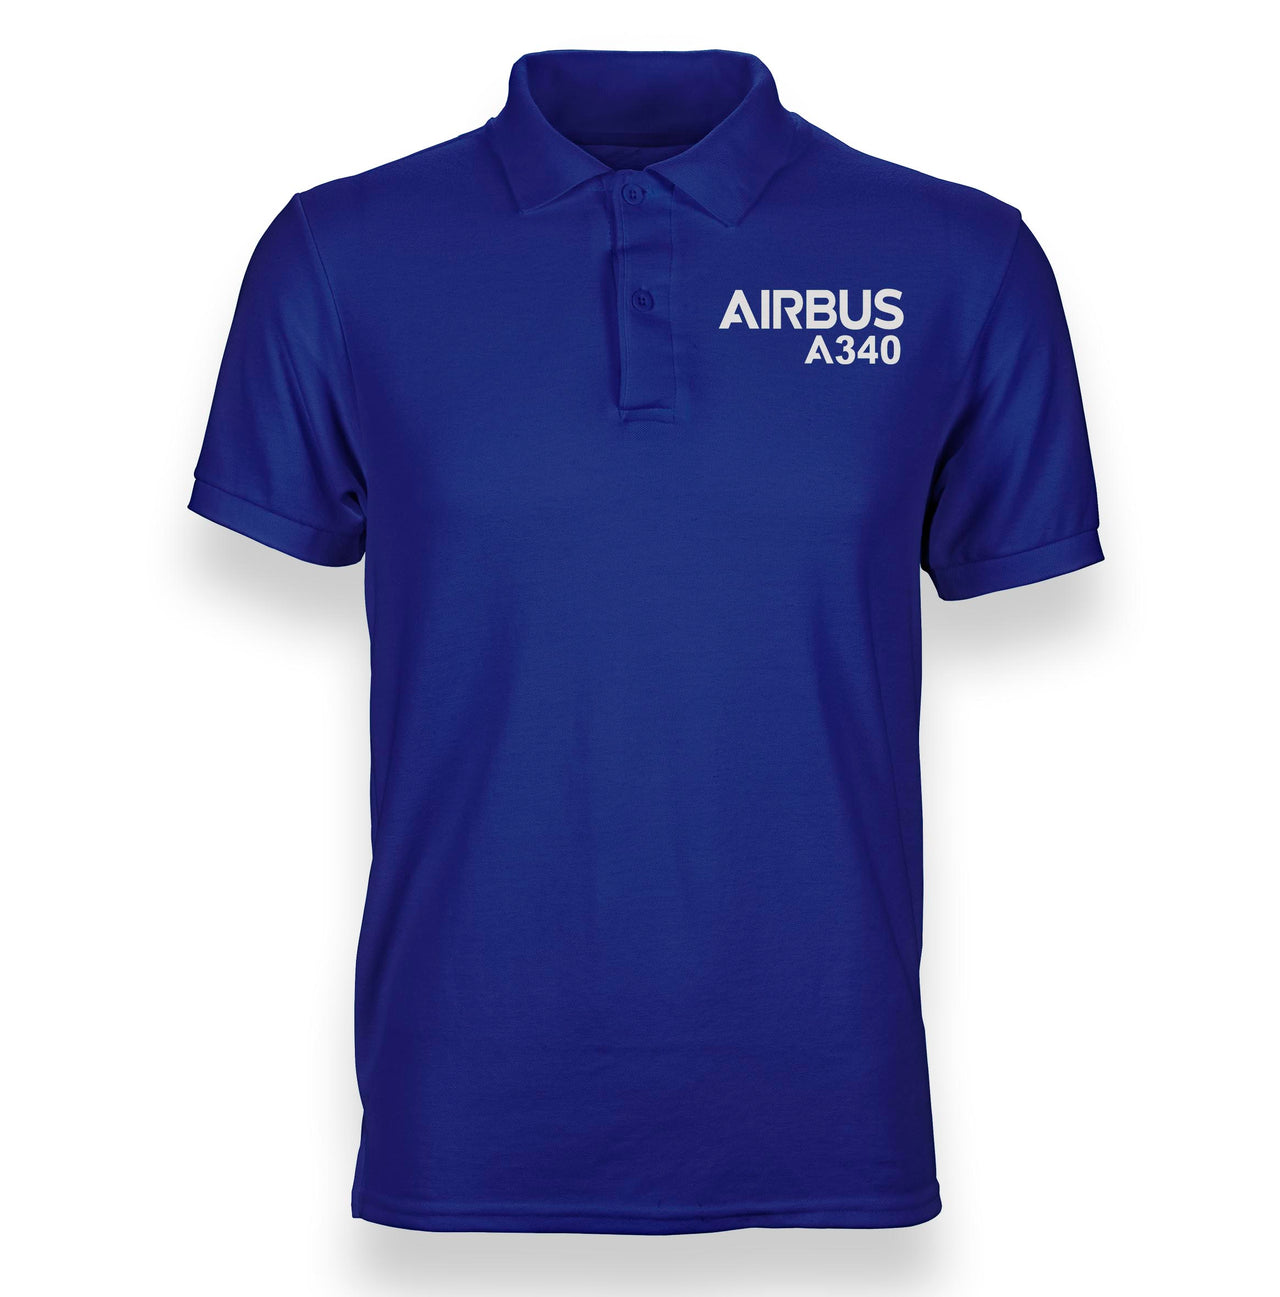 Airbus A340 & Text Designed Polo T-Shirts